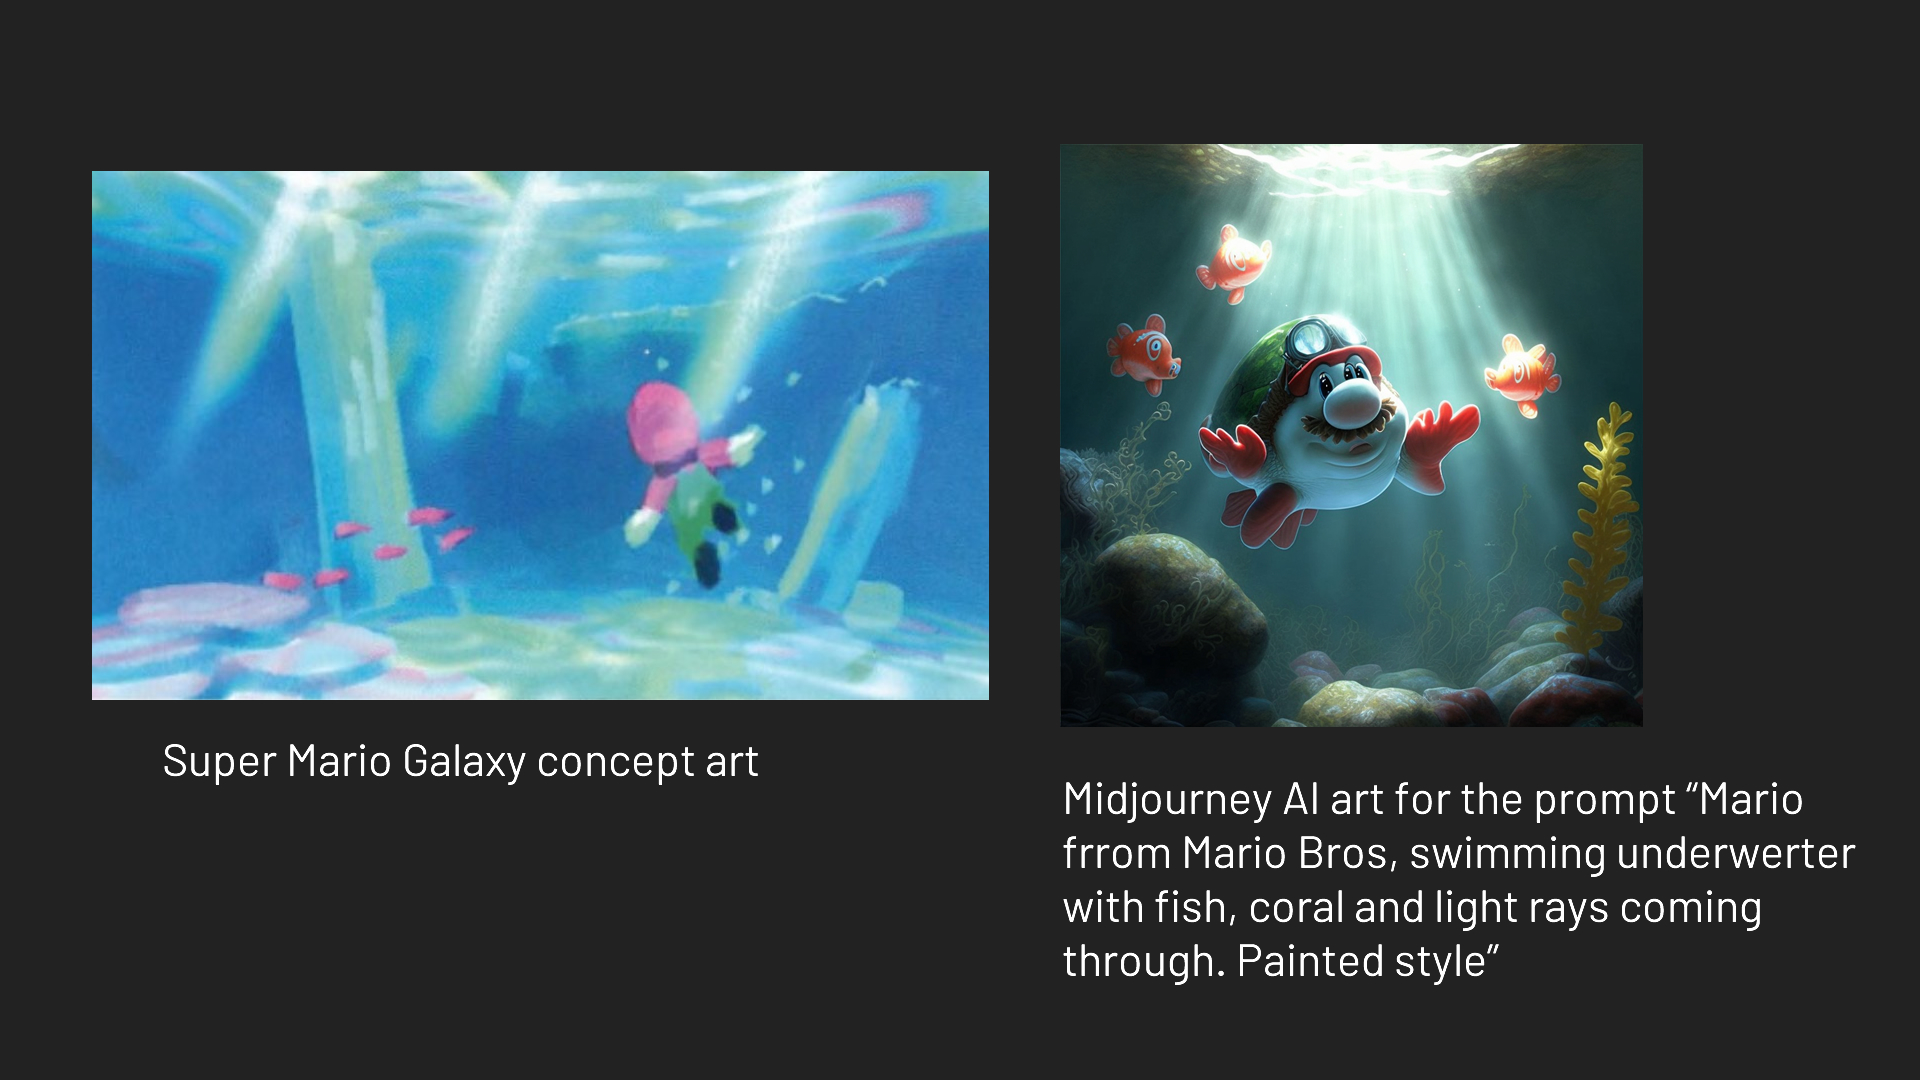 Can AI art handle underwater scenes? A picture of AI art vs human art for underwater scenes